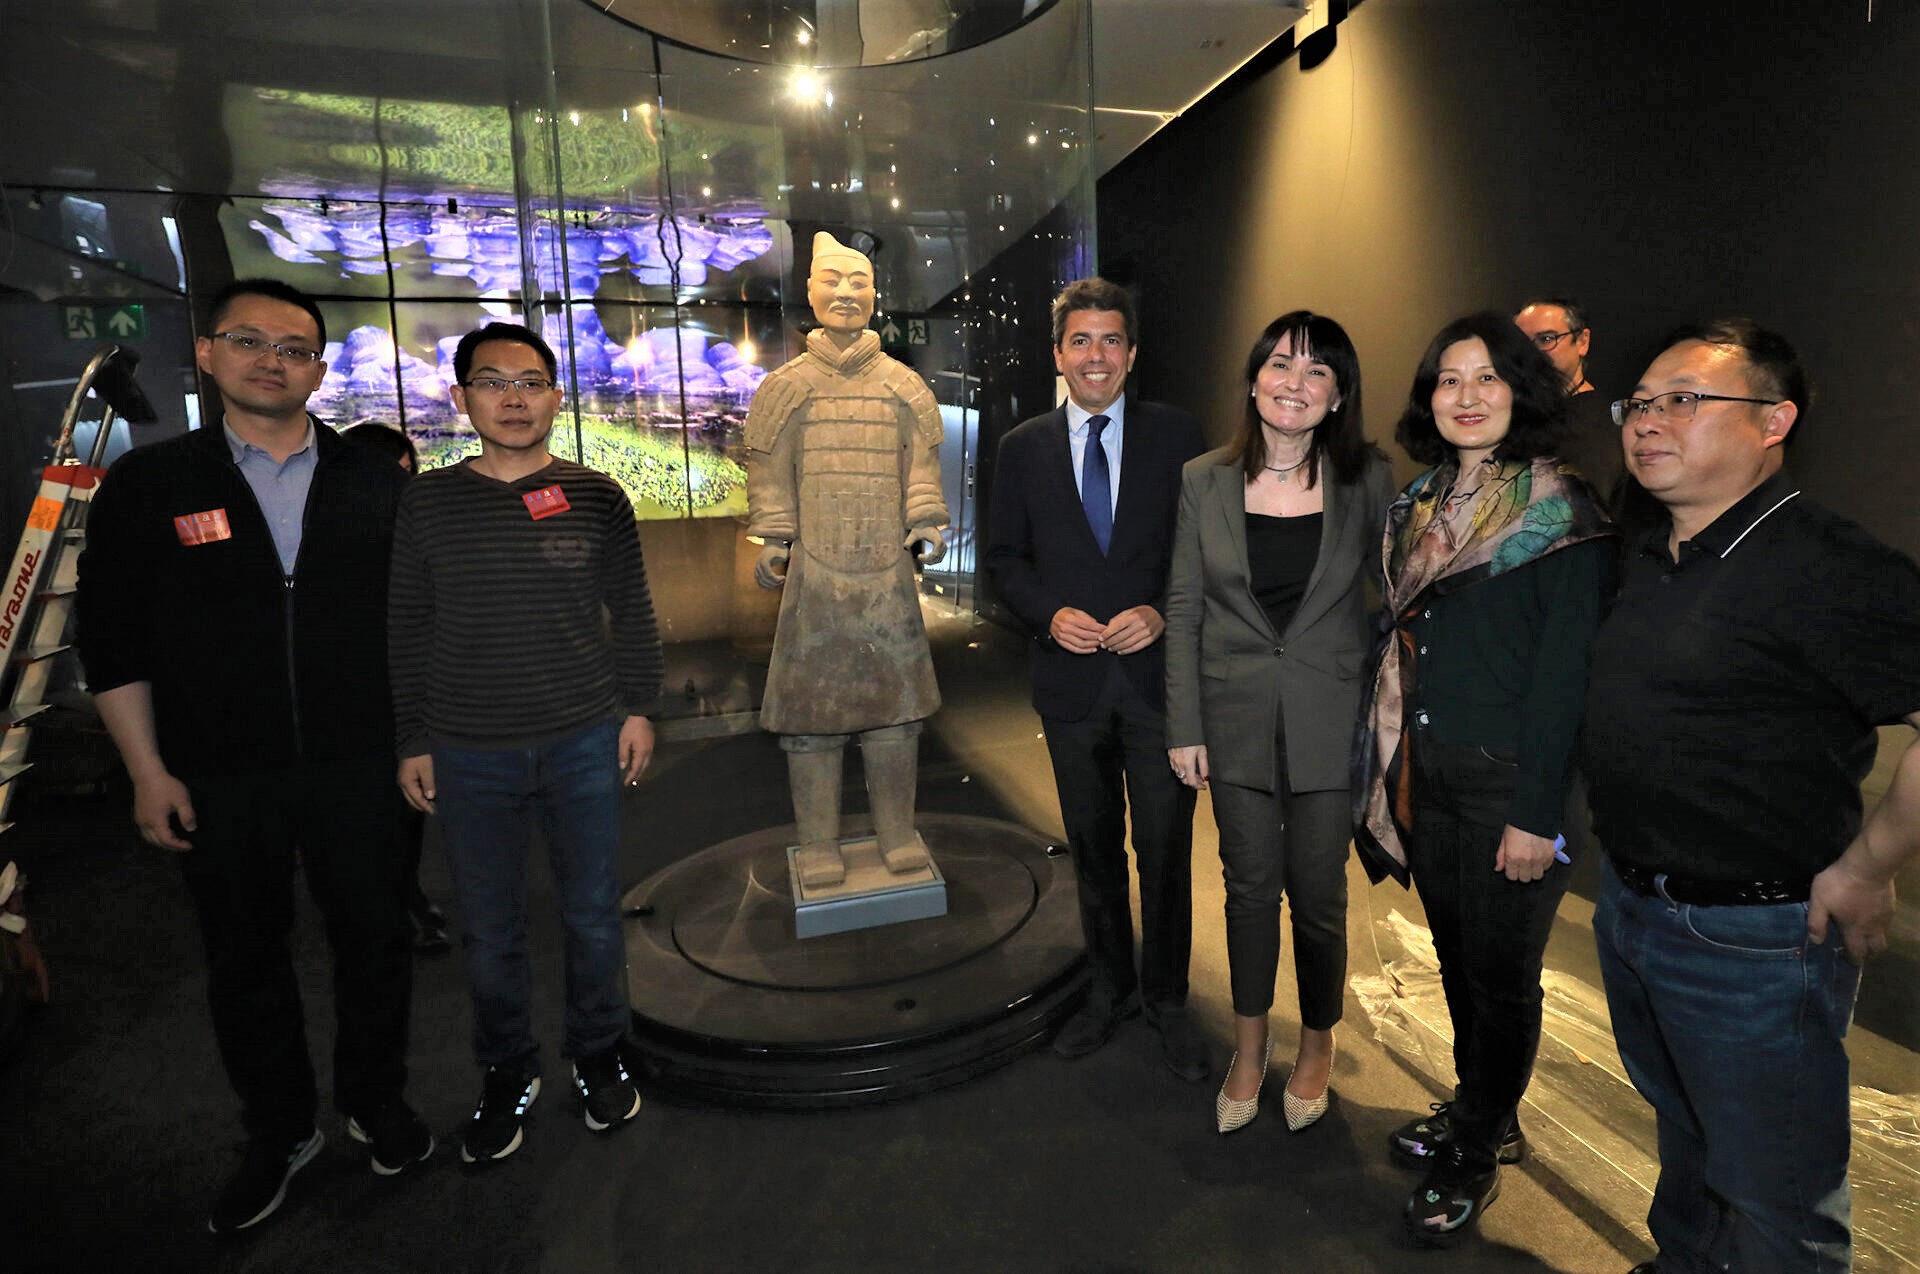 Unique Terracotta army exhibition opens next week on Spain's Costa Blanca